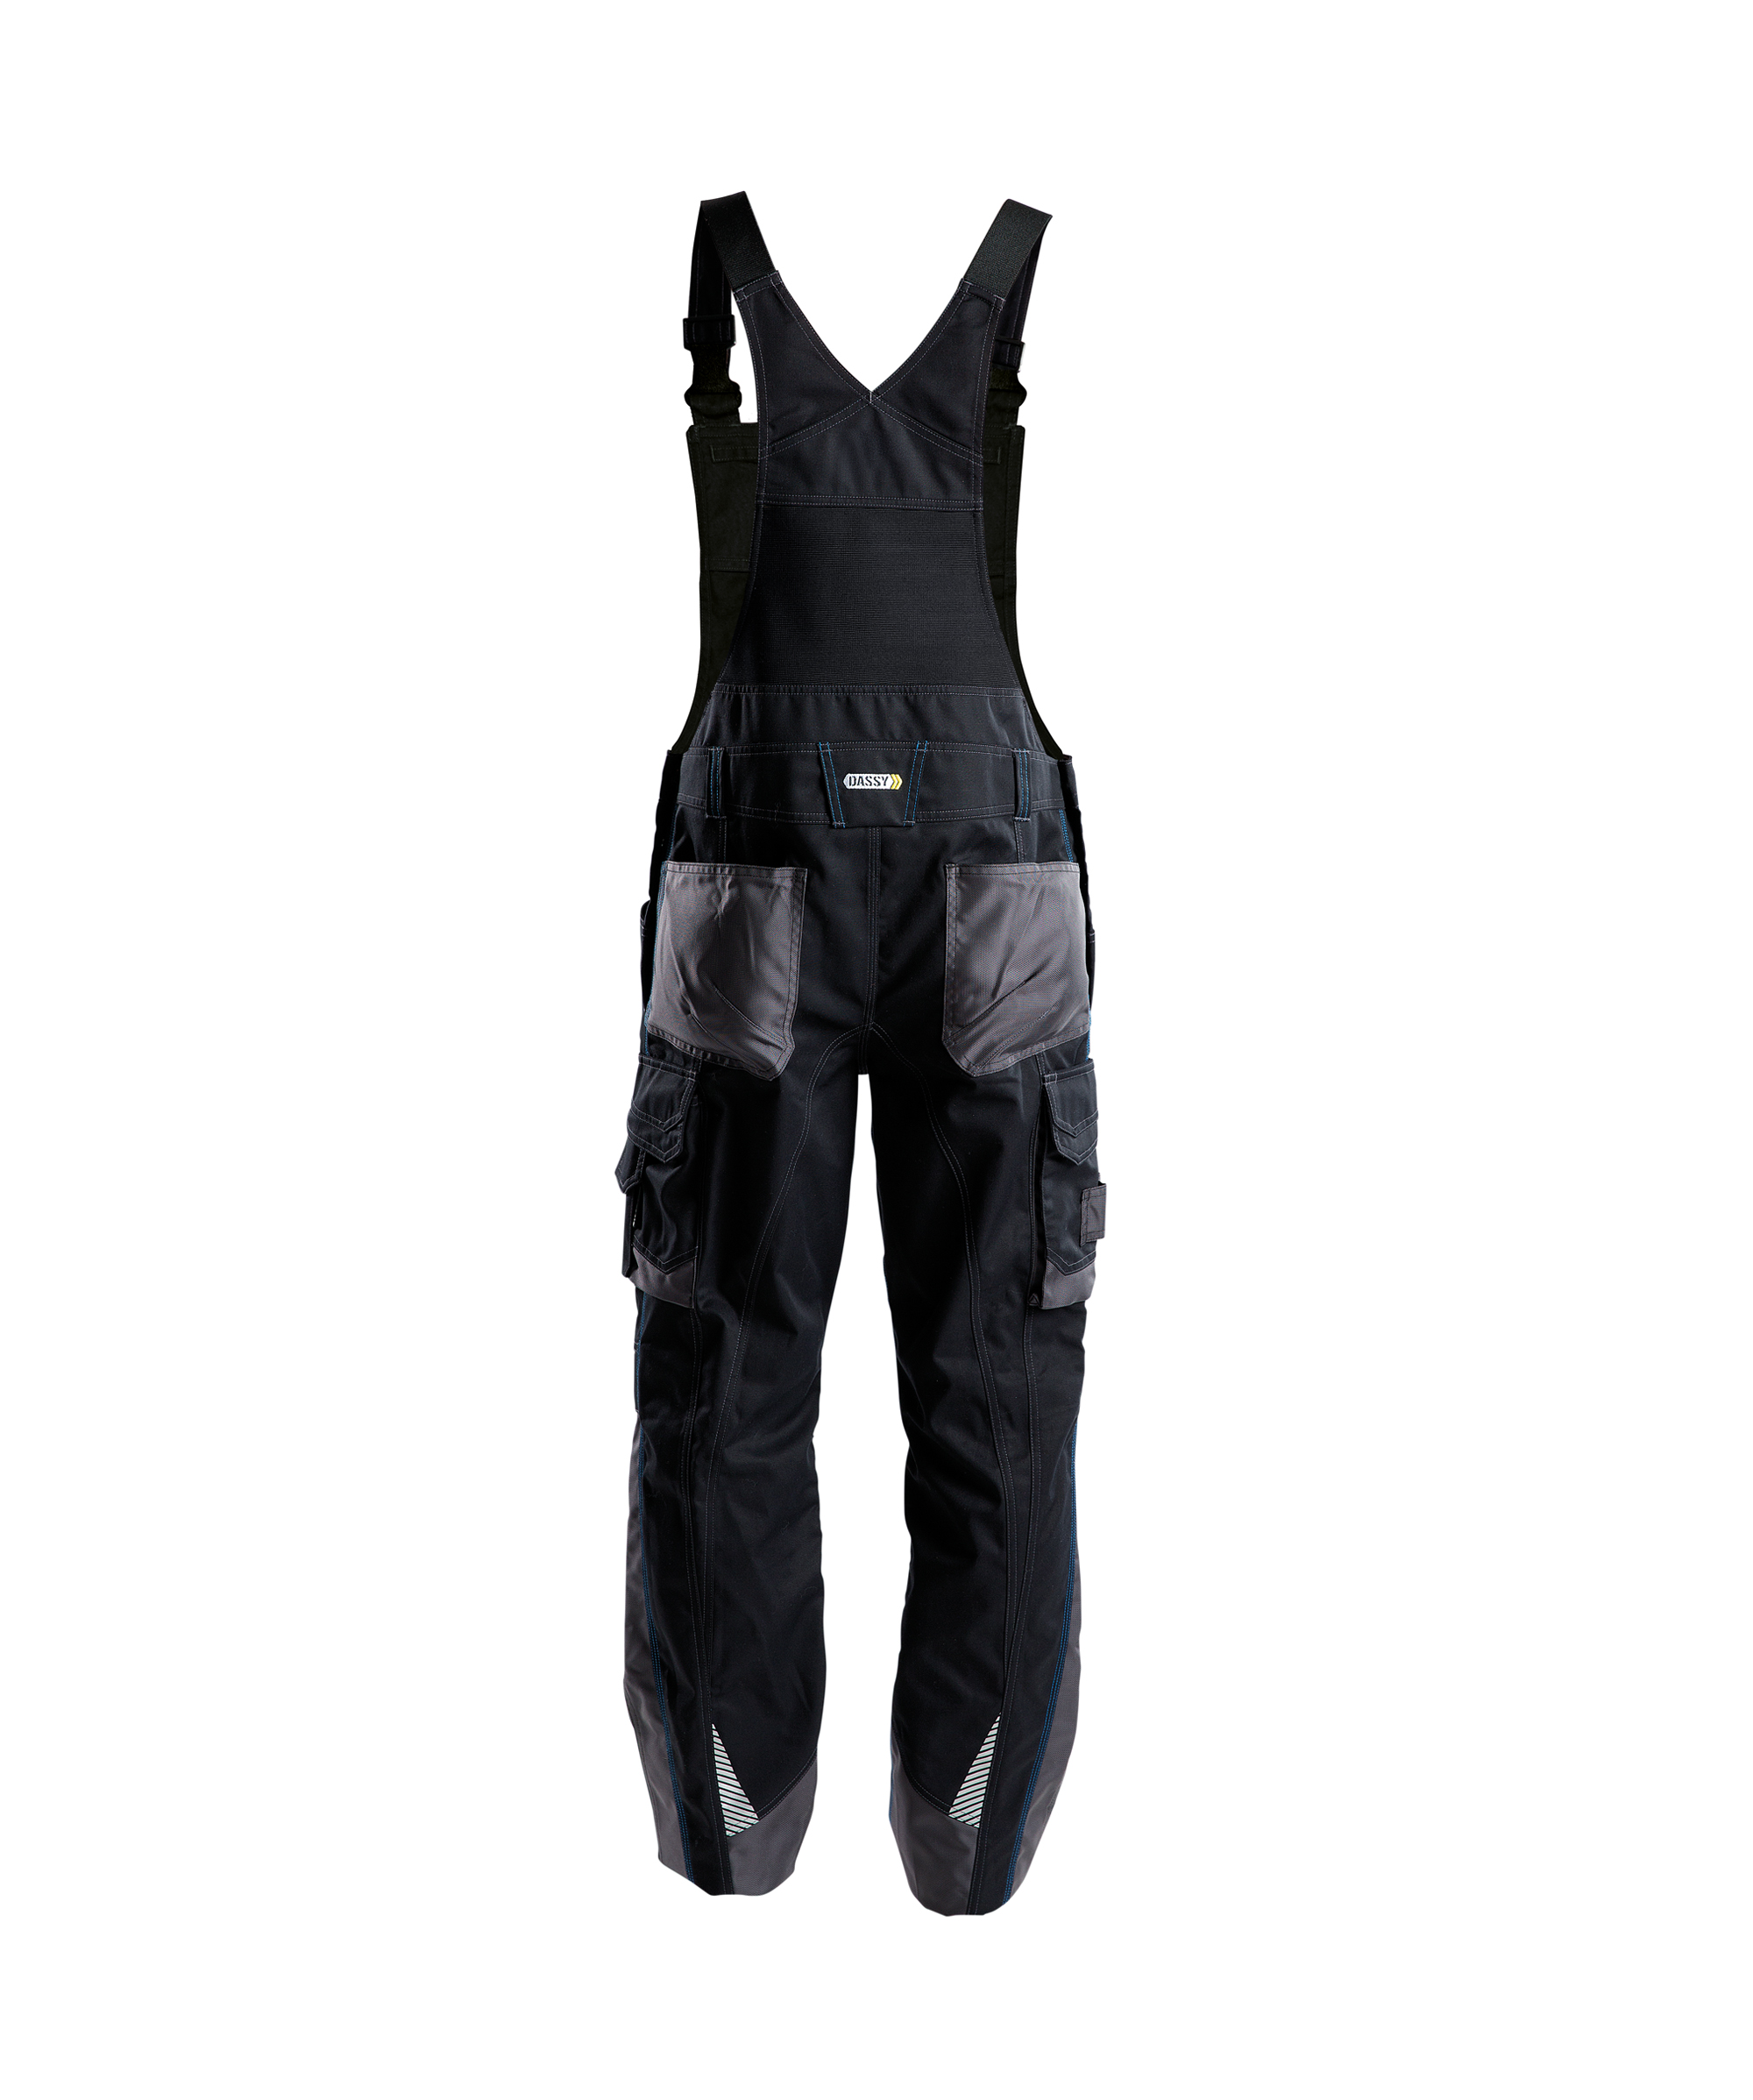 voltic_two-tone-brace-overall-with-knee-pockets_black-anthracite-grey_back.jpg